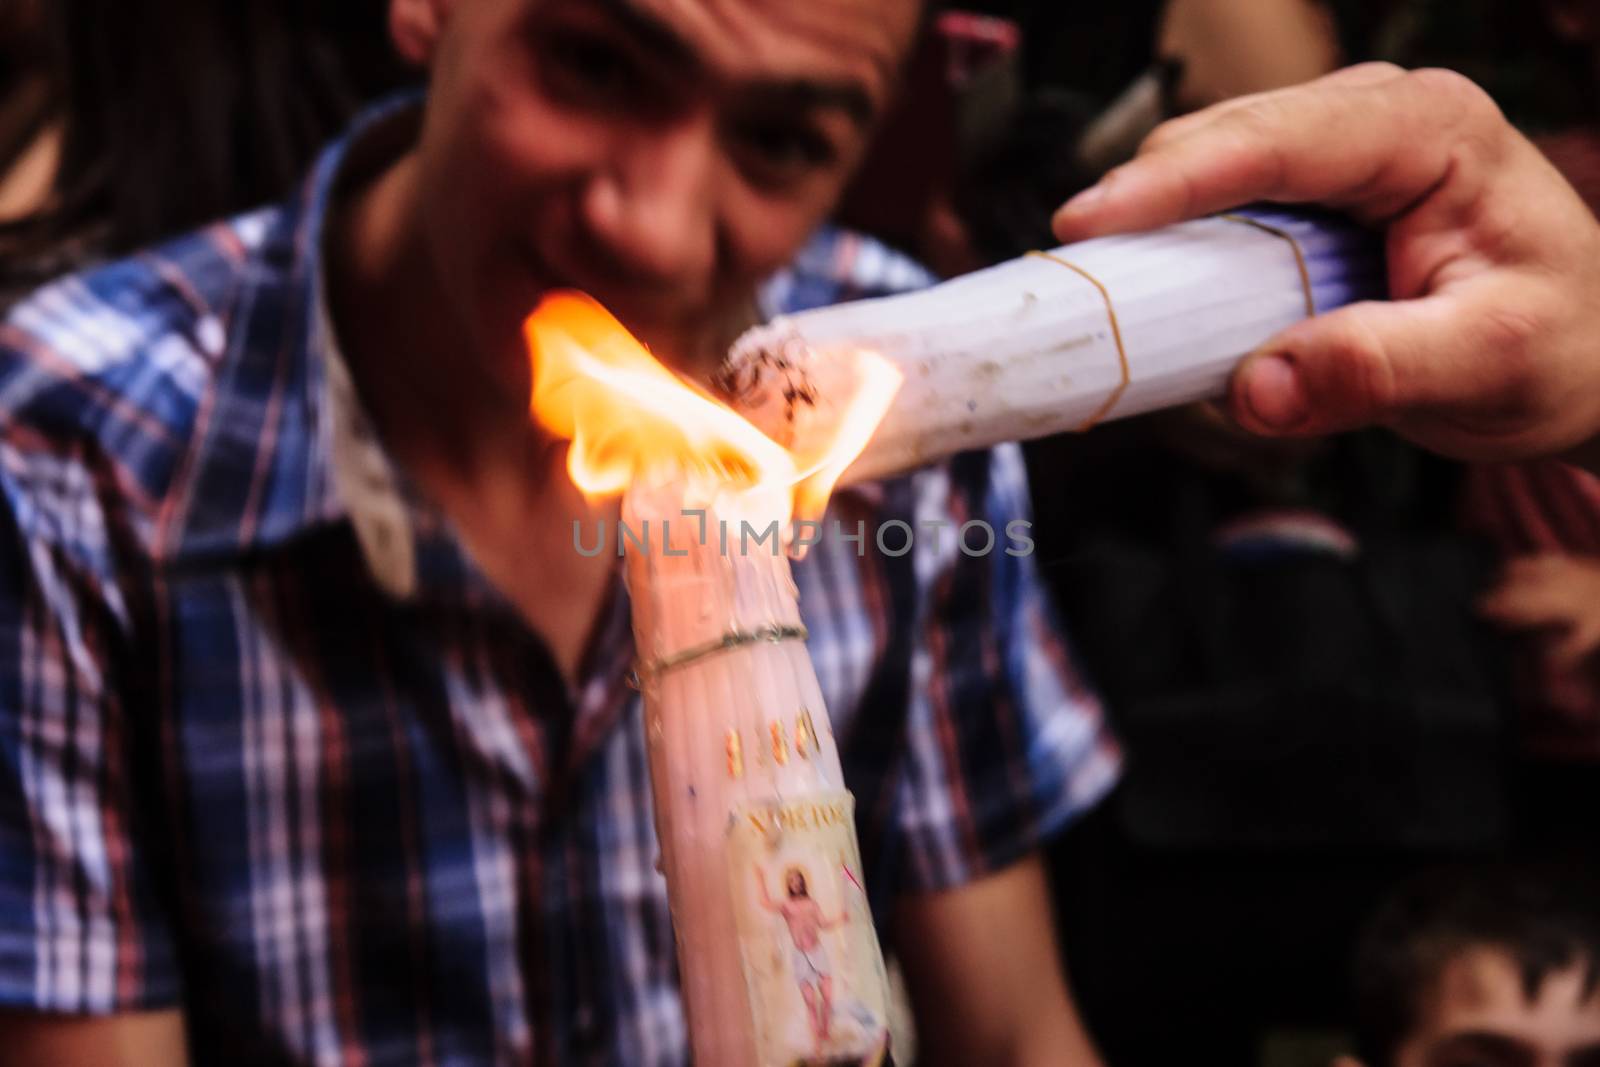 JERUSALEM - APRIL 19, 2014: The holy fire from the holy fire ceremony the Church of the Holy Sepulcher shared between pilgrims along the Via Dolorosa Street, on Holy Saturday, in Jerusalem, Israel